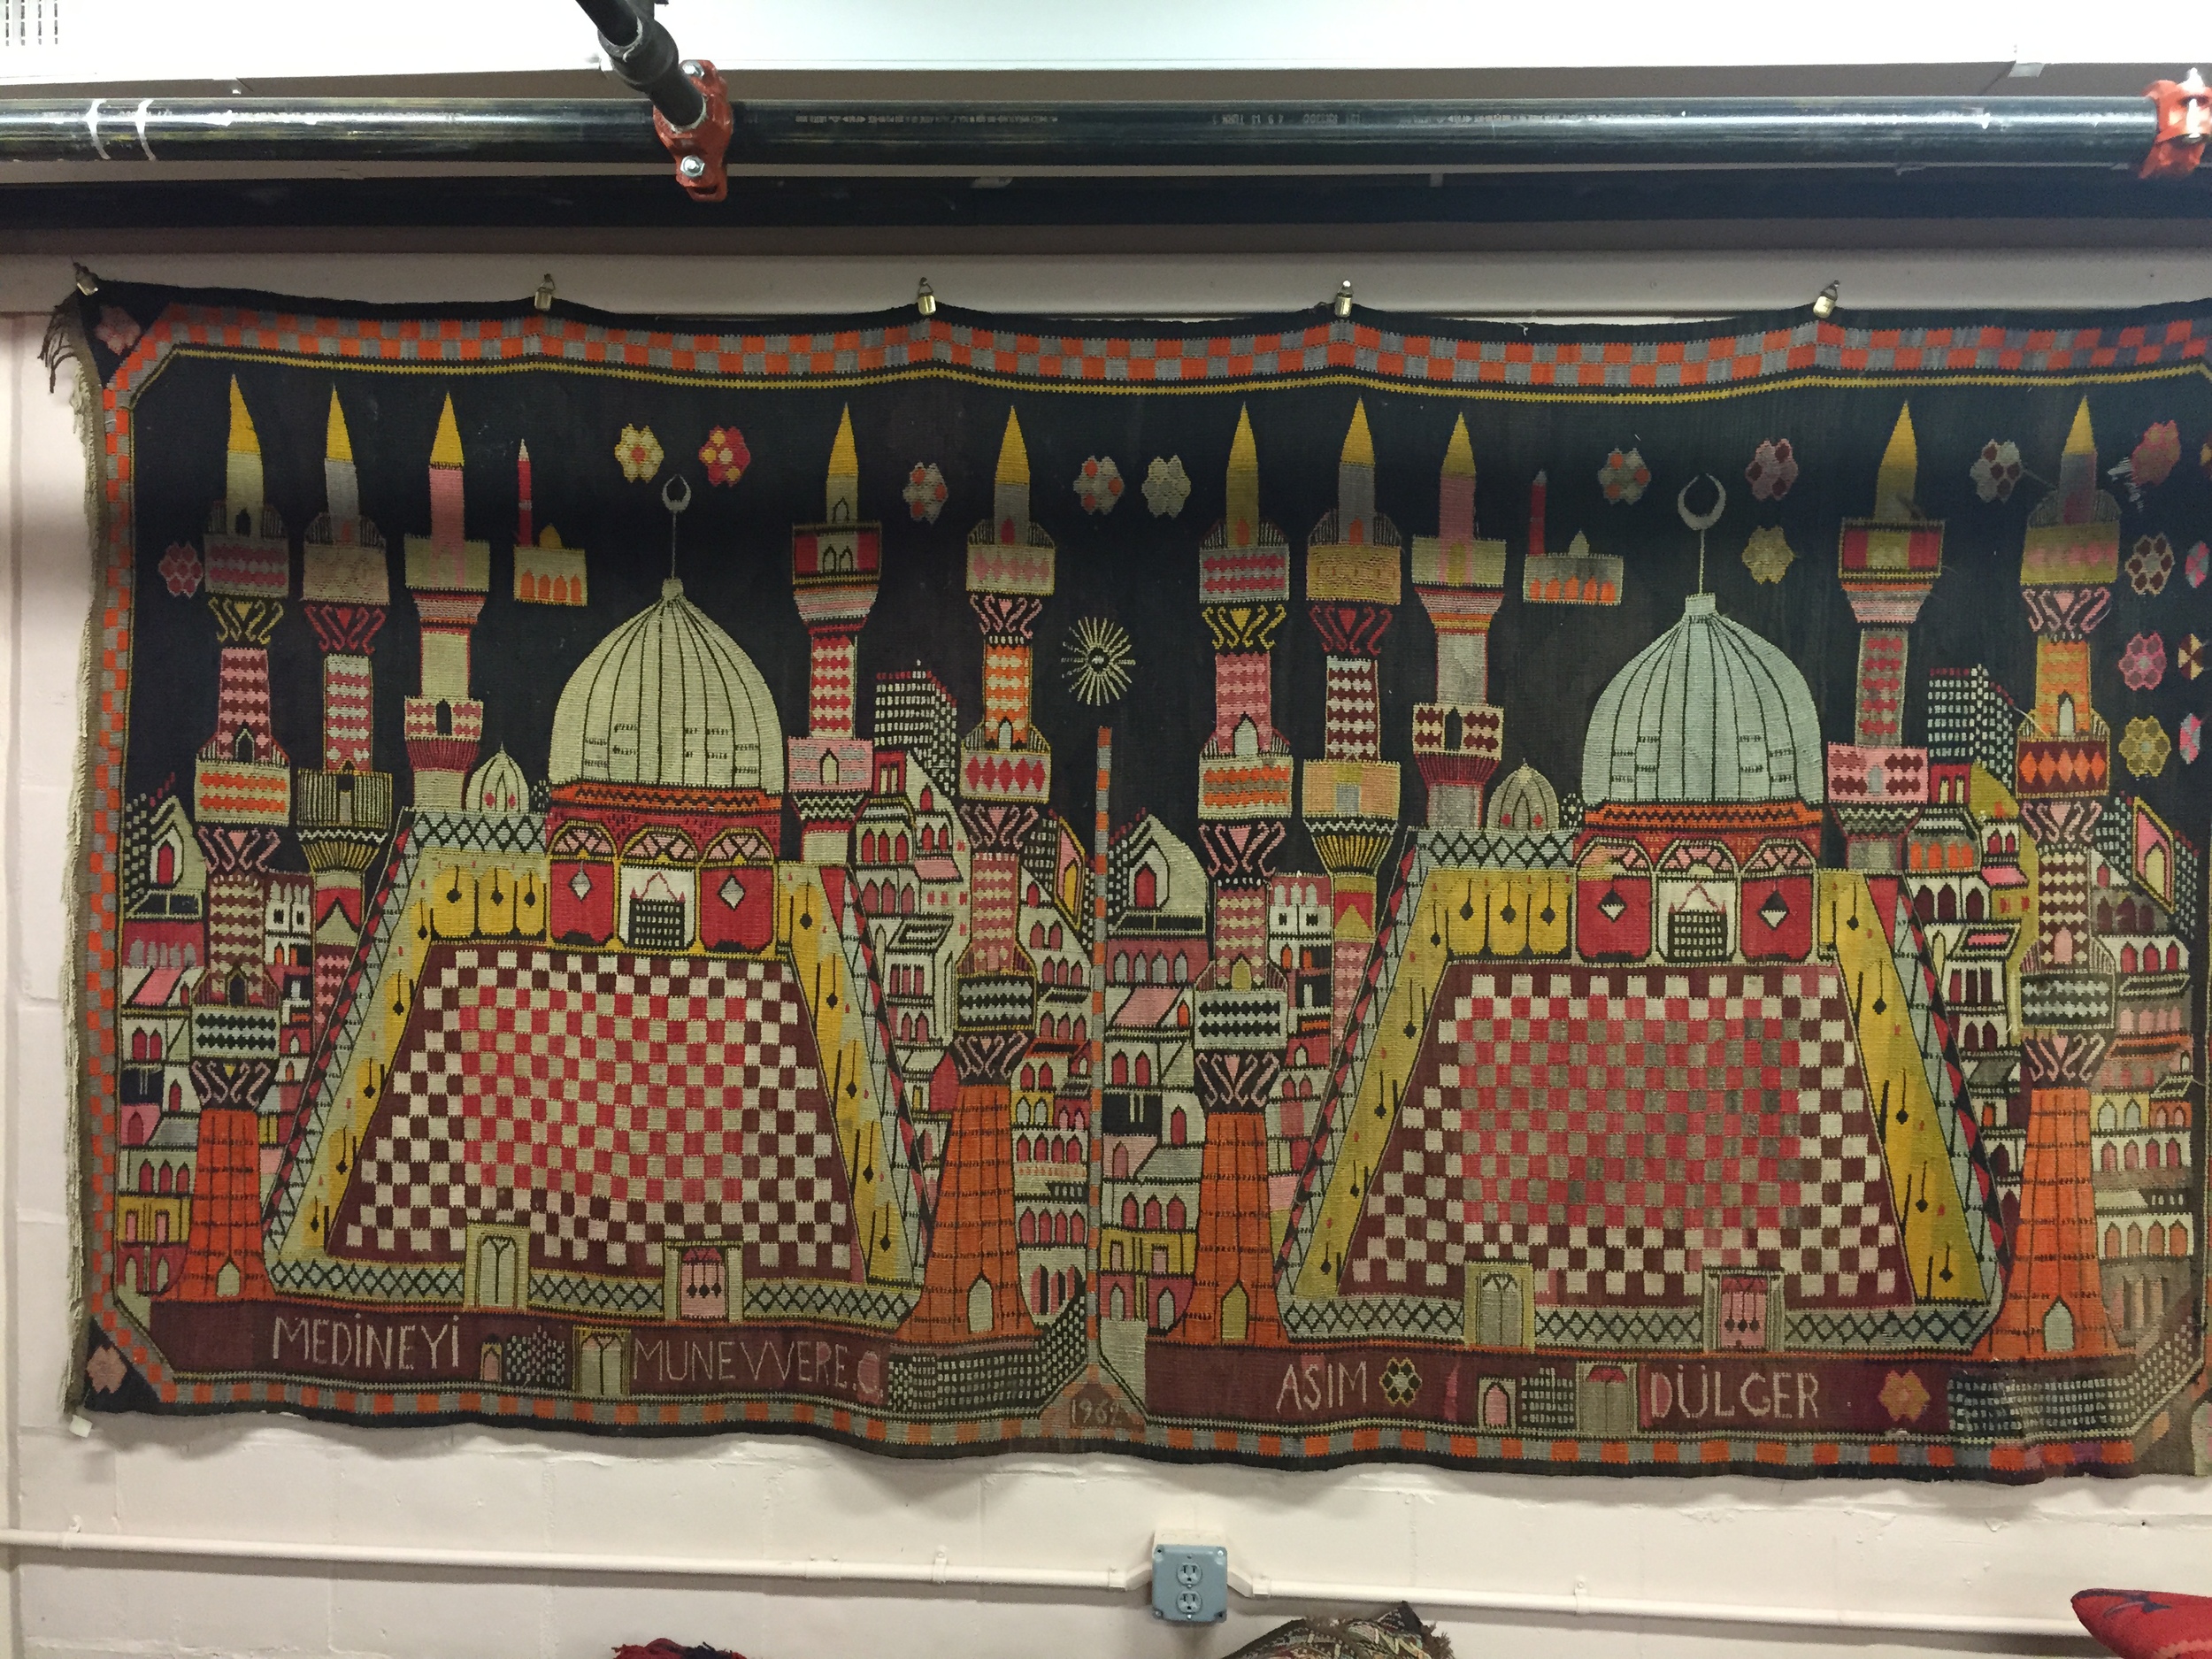 Kilim dated 1962, depicting the Grand Mosque at Mecca. It commemorates a family member's pilgrimage. 10ft x 5ft2in